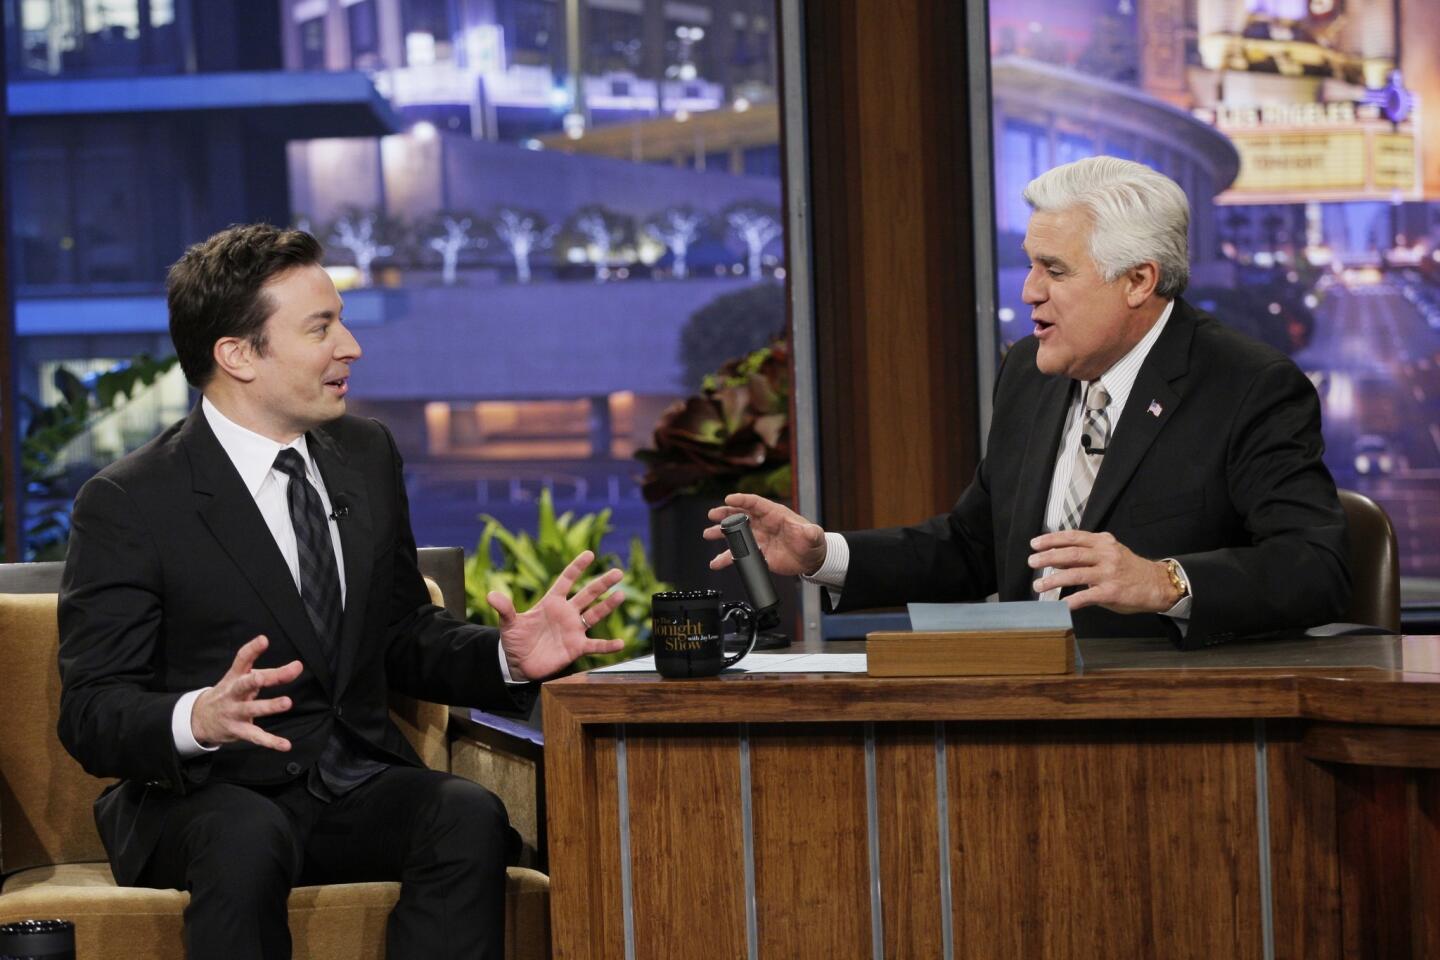 Jimmy Fallon took over "The Tonight Show" from veteran 22-year host Jay Leno on Feb. 17, 2014, marking the end of an era in late night television.